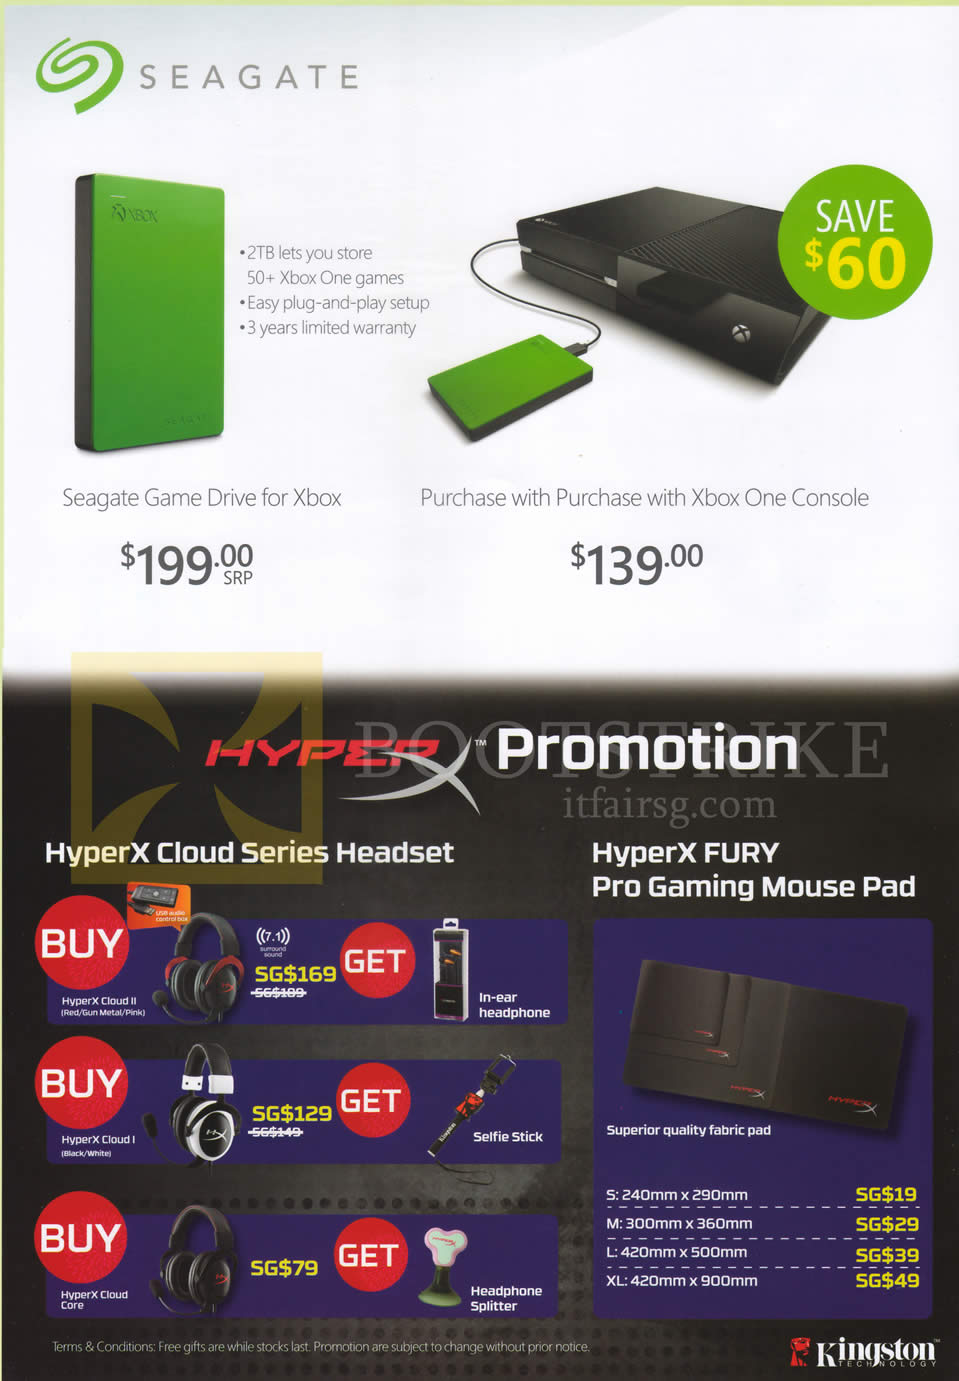 COMEX 2015 price list image brochure of Seagate Kingston Game Drive For Xbox One, HyperX Cloud Series Headset, HyperX Fury Pro Gaming Mouse Pad